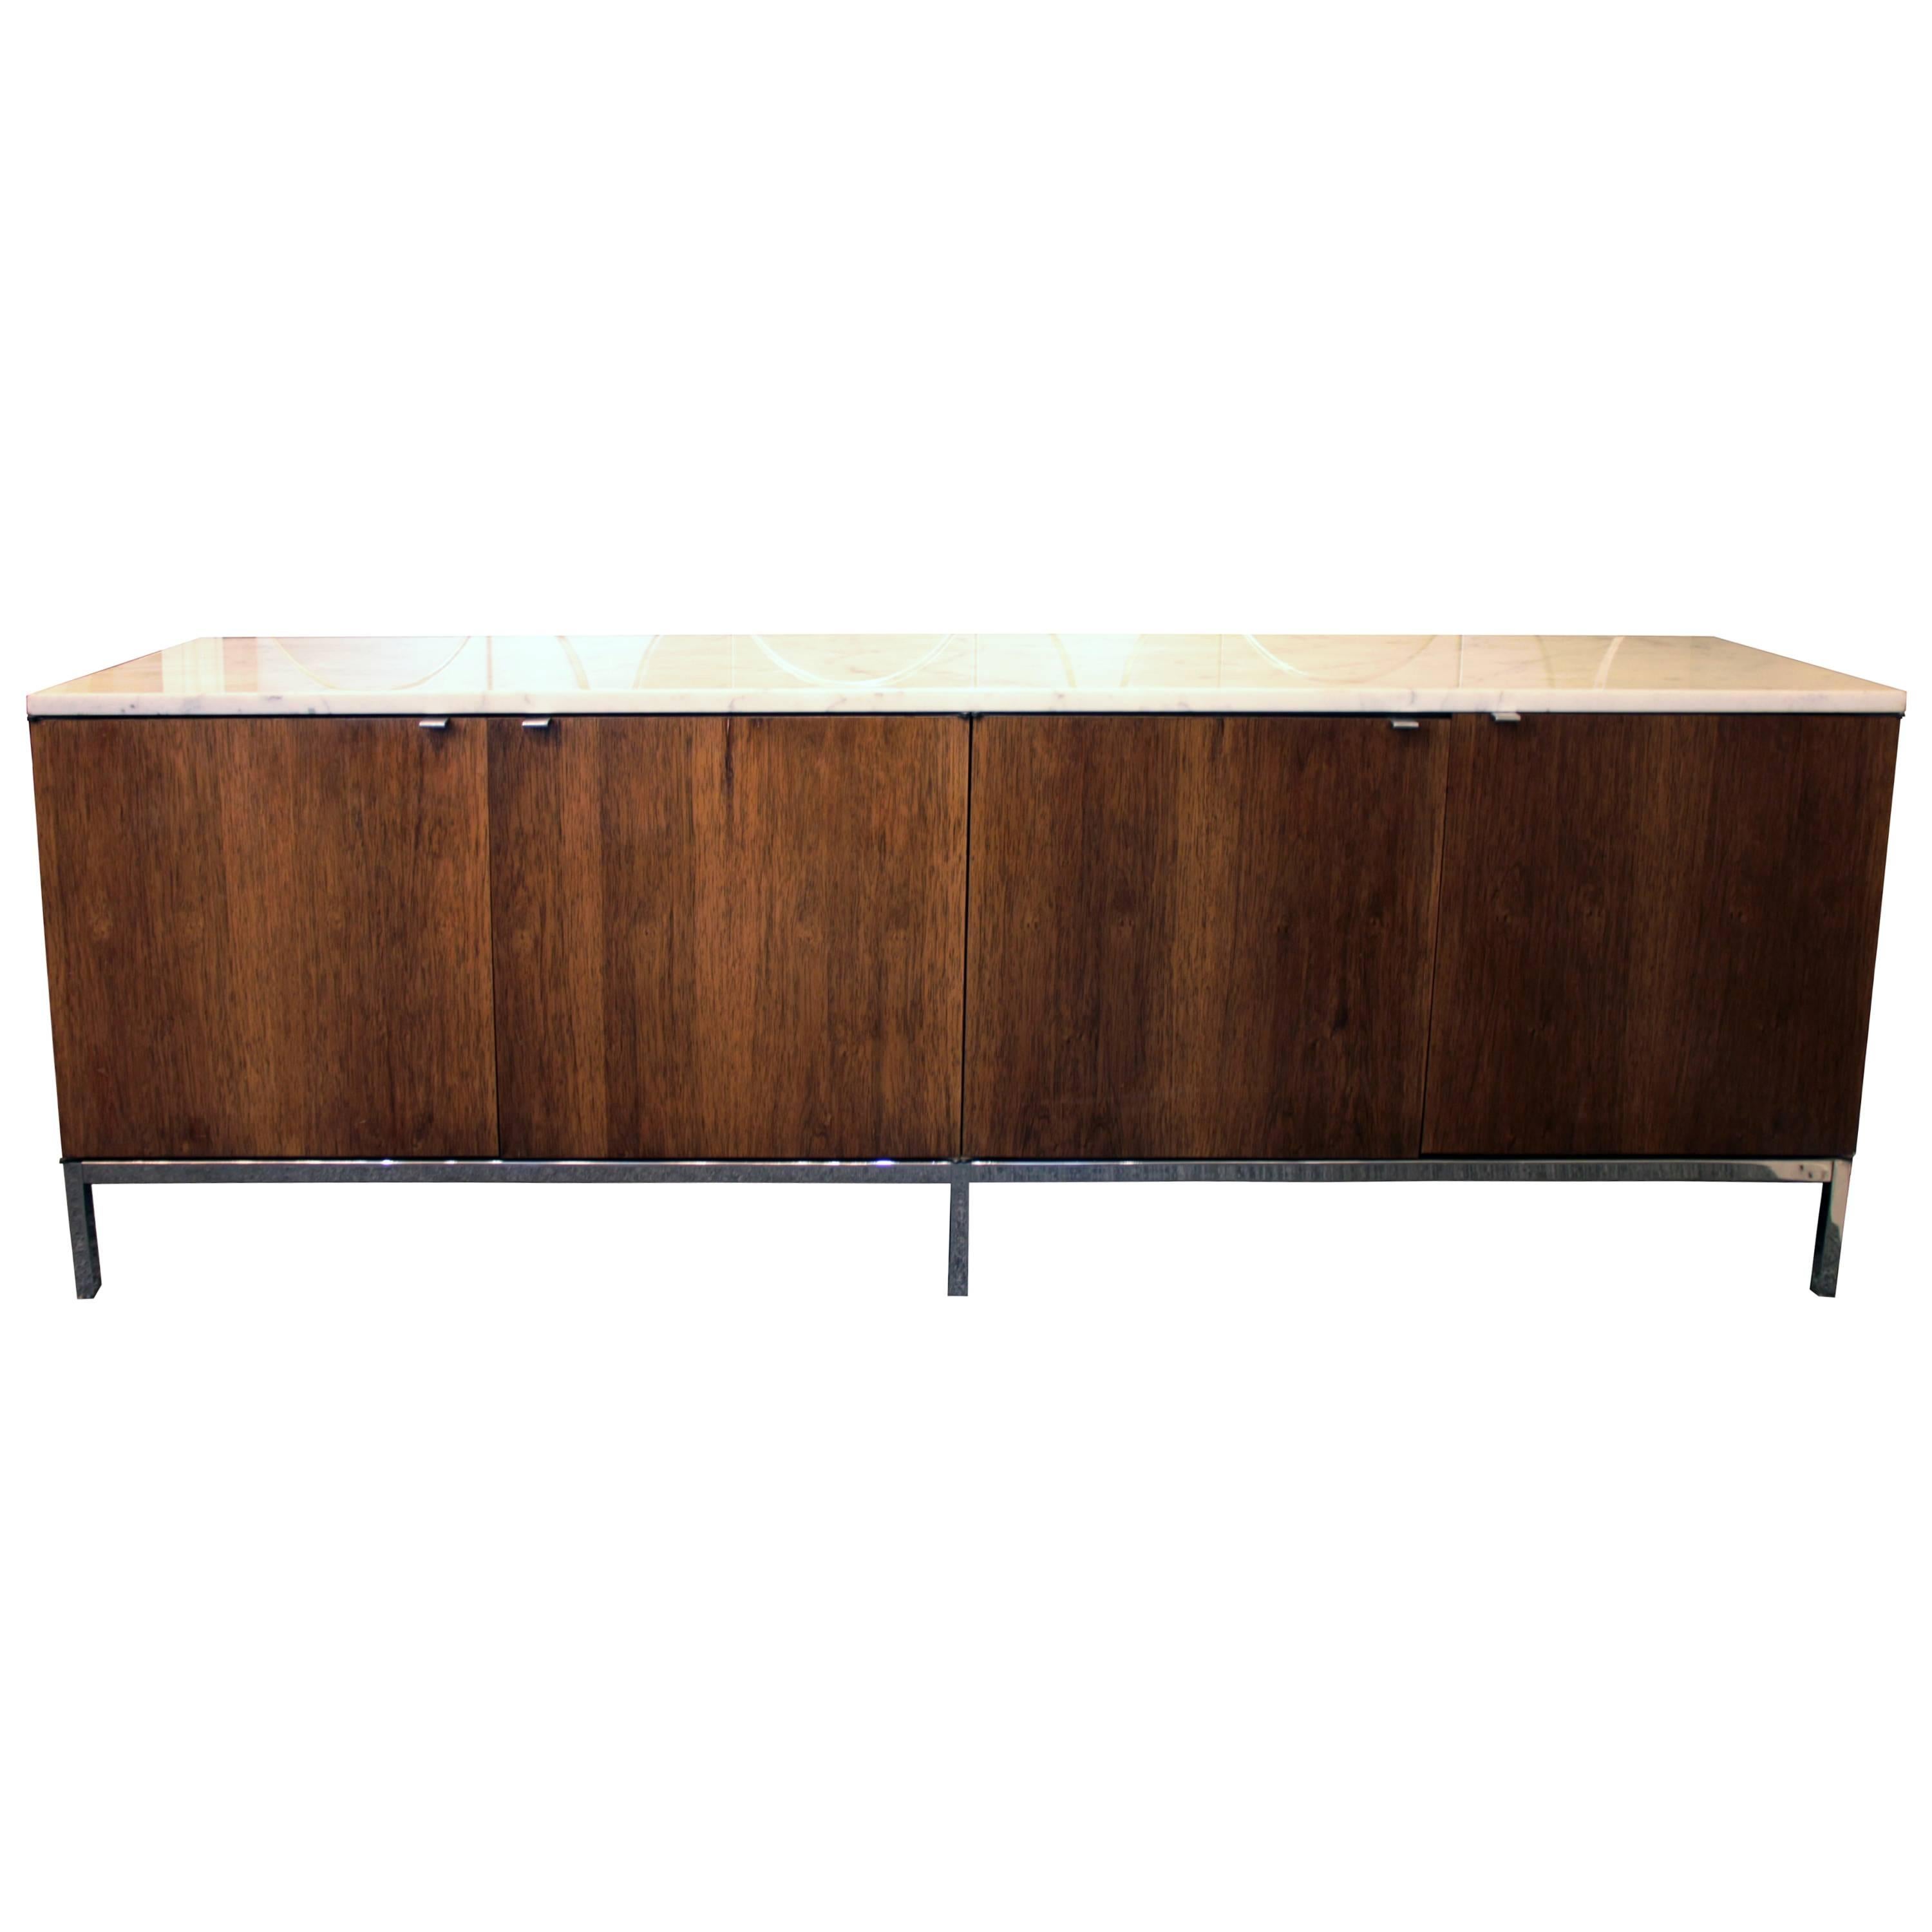 Large Credenza by Florence Knoll for Knoll International, France, 1964